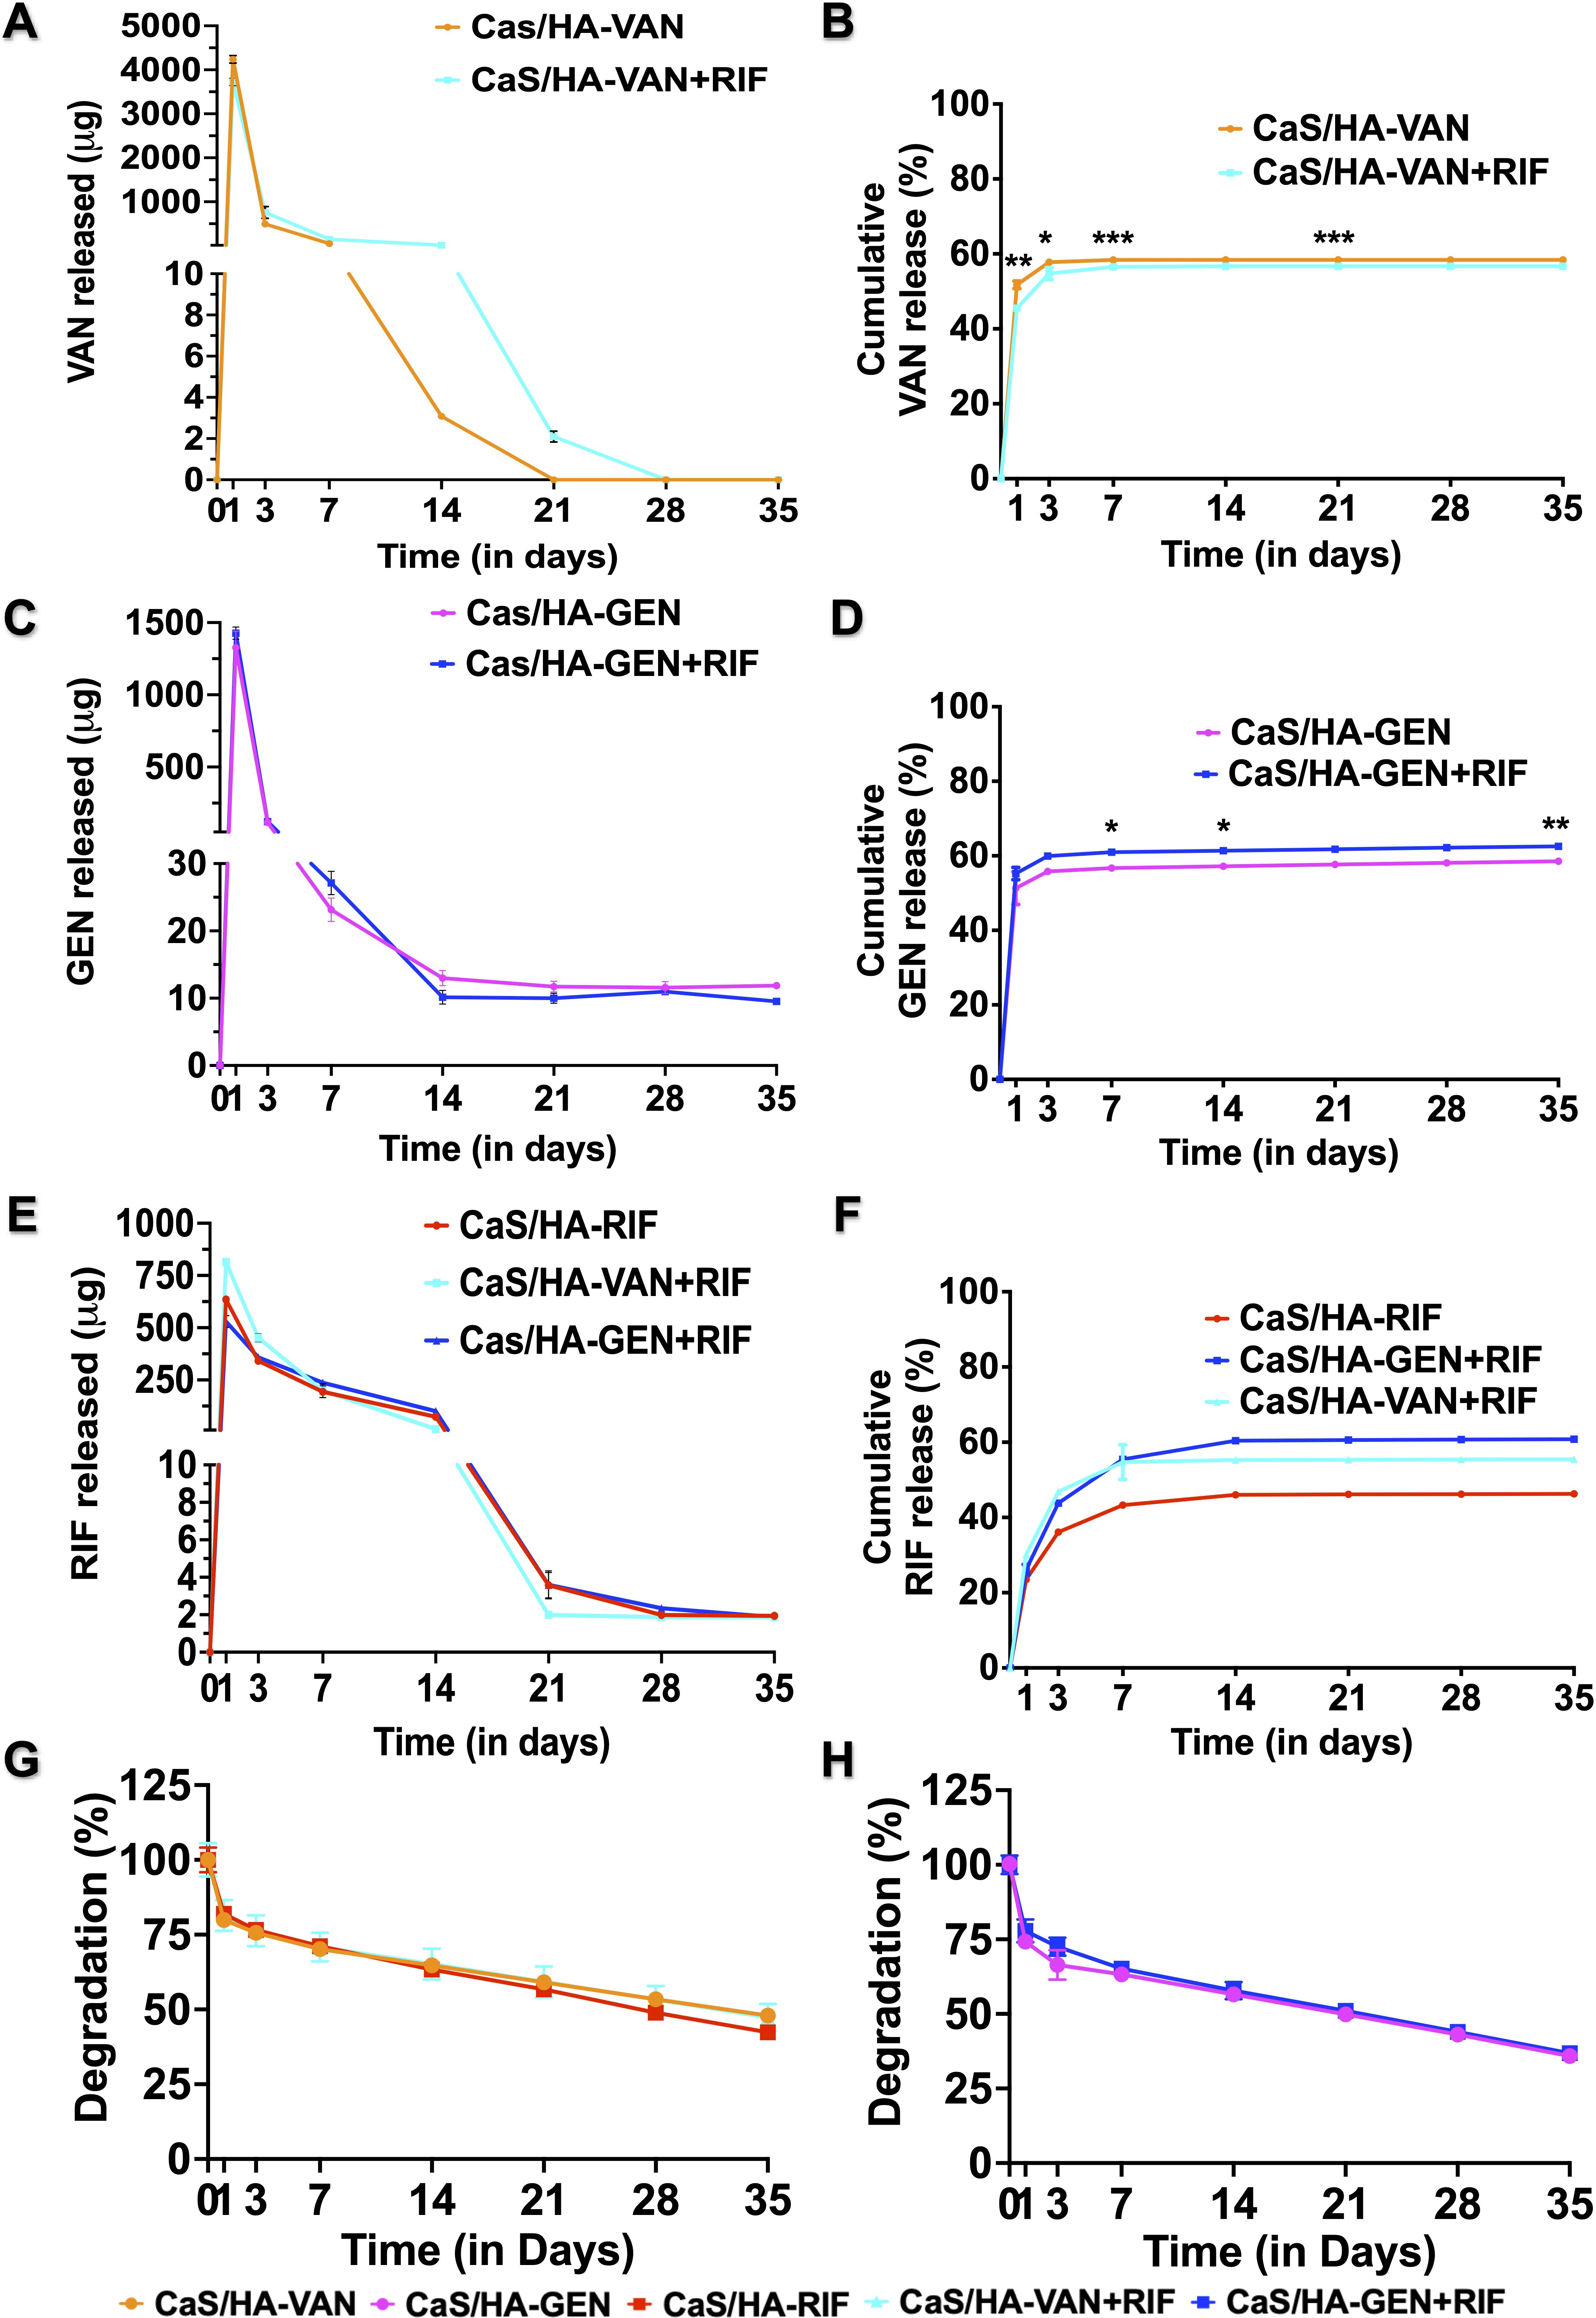 Fig. 2 
            In vitro antibiotic release profile and material degradation. a) to f) Release per day and cumulative release profile of vancomycin (VAN), gentimicin (GEN), and rifampicin (RIF) from calcium sulphate/hydroxyapatite (CaS/HA)-VAN/GEN with or without RIF at days 1, 3, 7, 14, 21, 28, and 35. g) and h) In vitro material degradation profile of tested CaS/HA-antibiotic composites in phosphate-buffered saline. An independent-samples t-test was used to compare the in vitro material degradation profile and cumulative release profile CaS/HA-VAN/GEN alone or in combination with RIF. For comparison of cumulative release profile of RIF, one-way analysis of variance with Dunn’s multiple comparison test was used. *p < 0.05, **p < 0.01, ***p < 0.001.
          